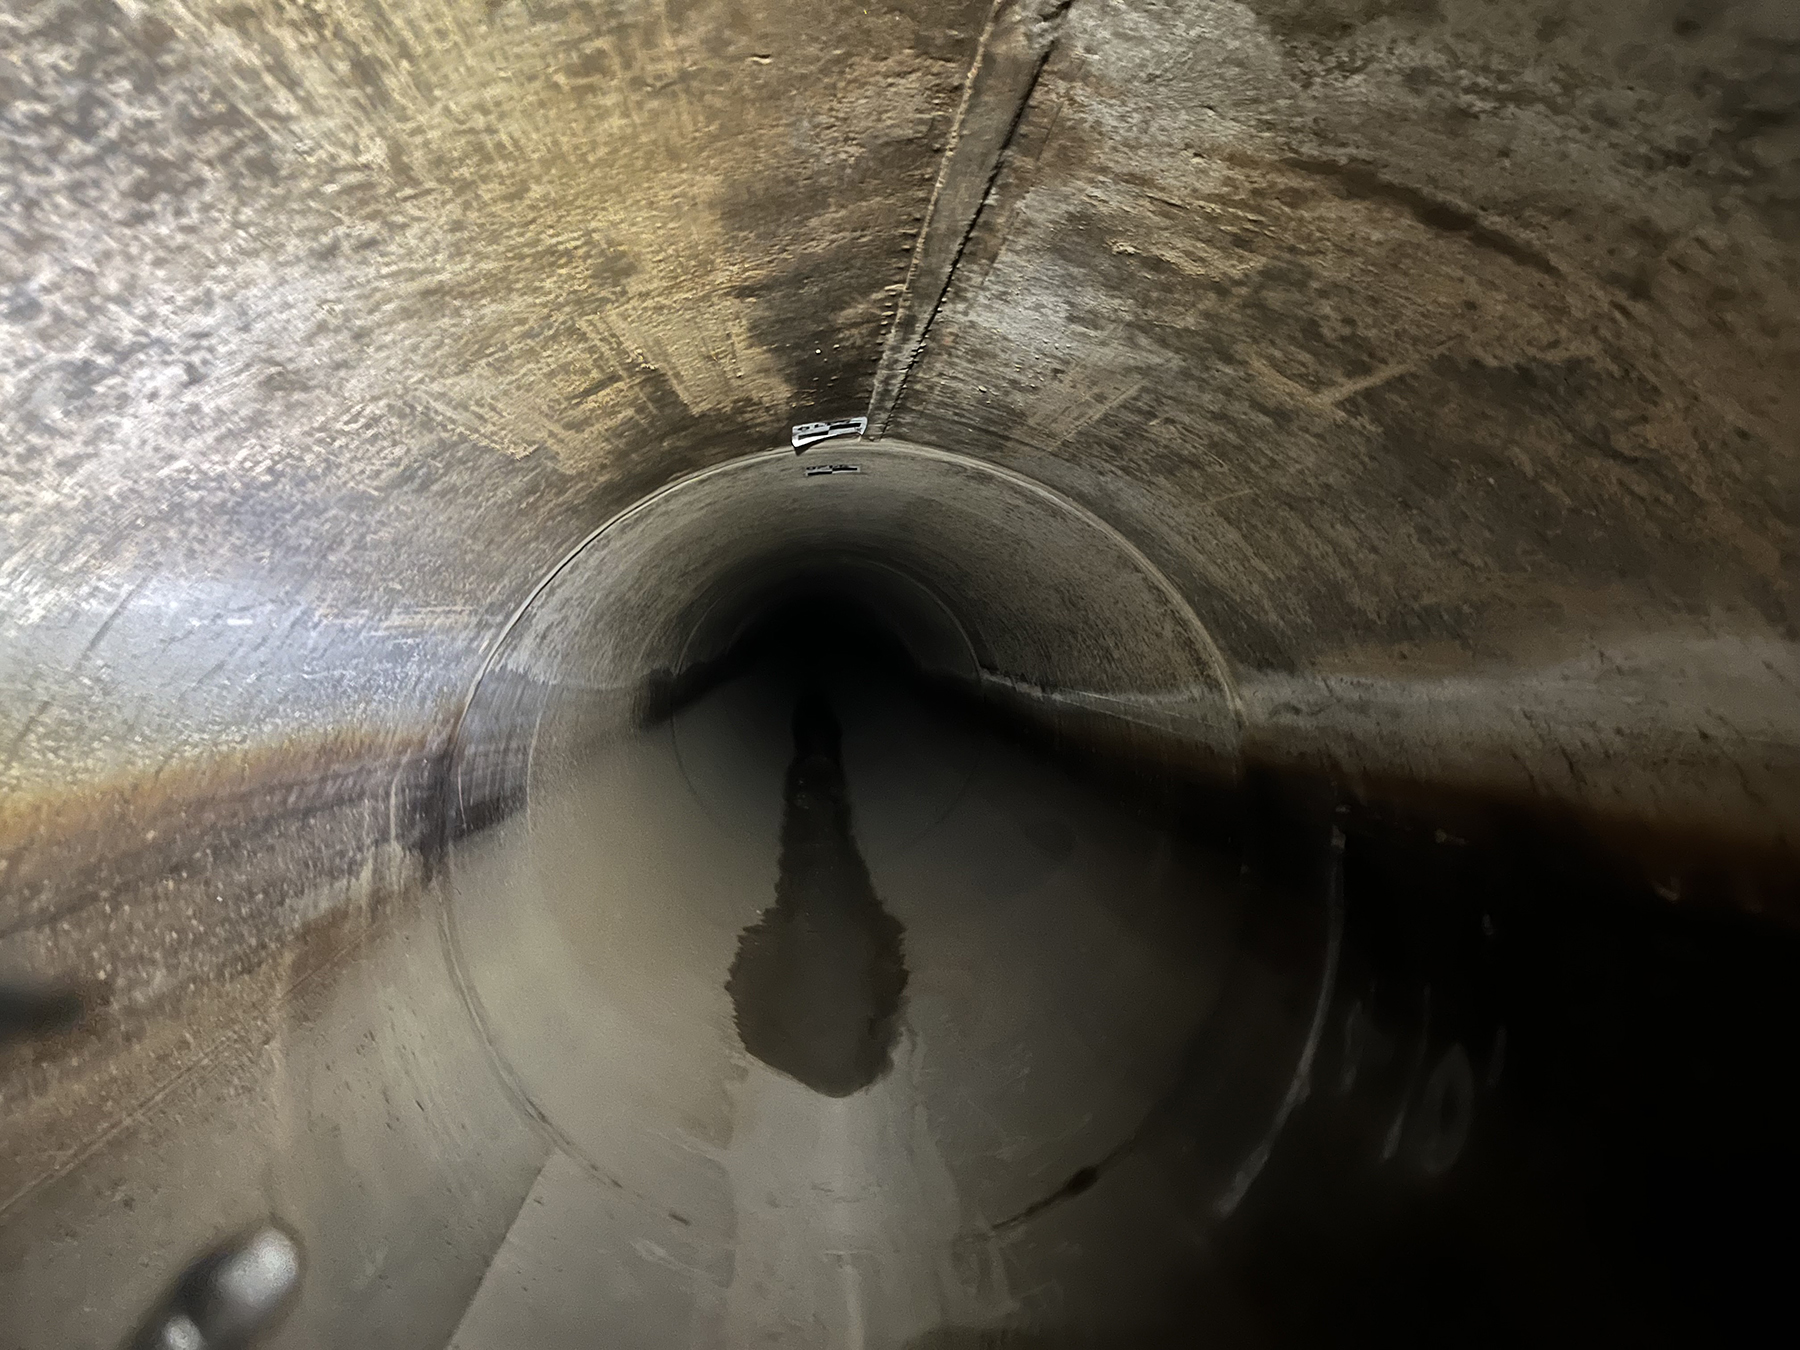 The section of the Red Mountain Tunnel undergoing rehabilitation, following power washing but before application of the GeoSpray 61 geopolymer mortar product. (Image courtesy of Michels Trenchless Inc.)